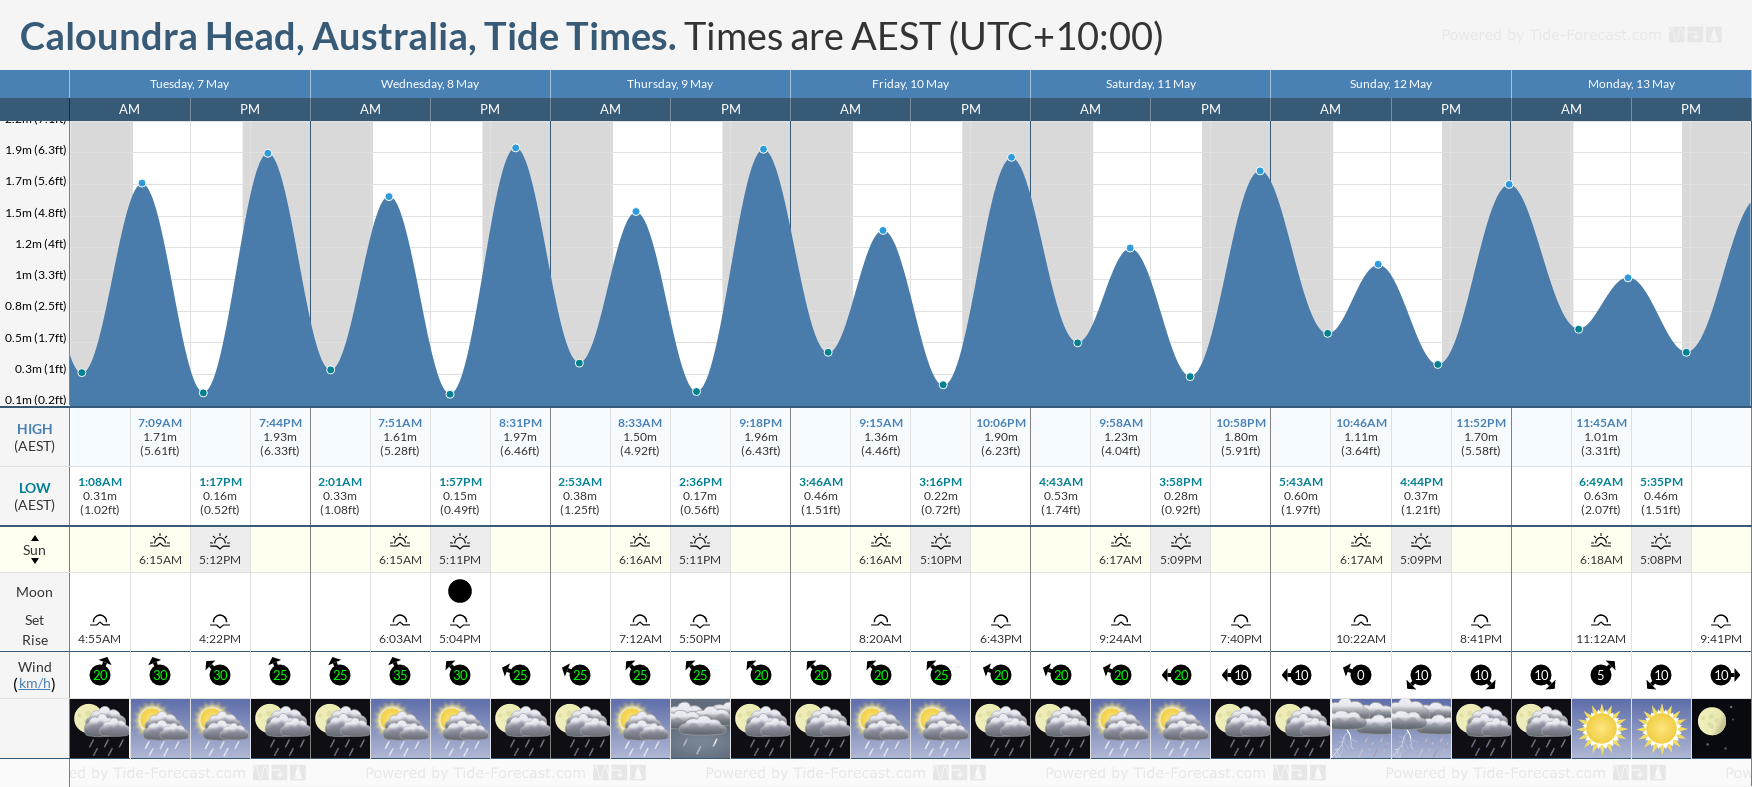 Caloundra Head, Australia Tide Chart including high and low tide tide times for the next 7 days